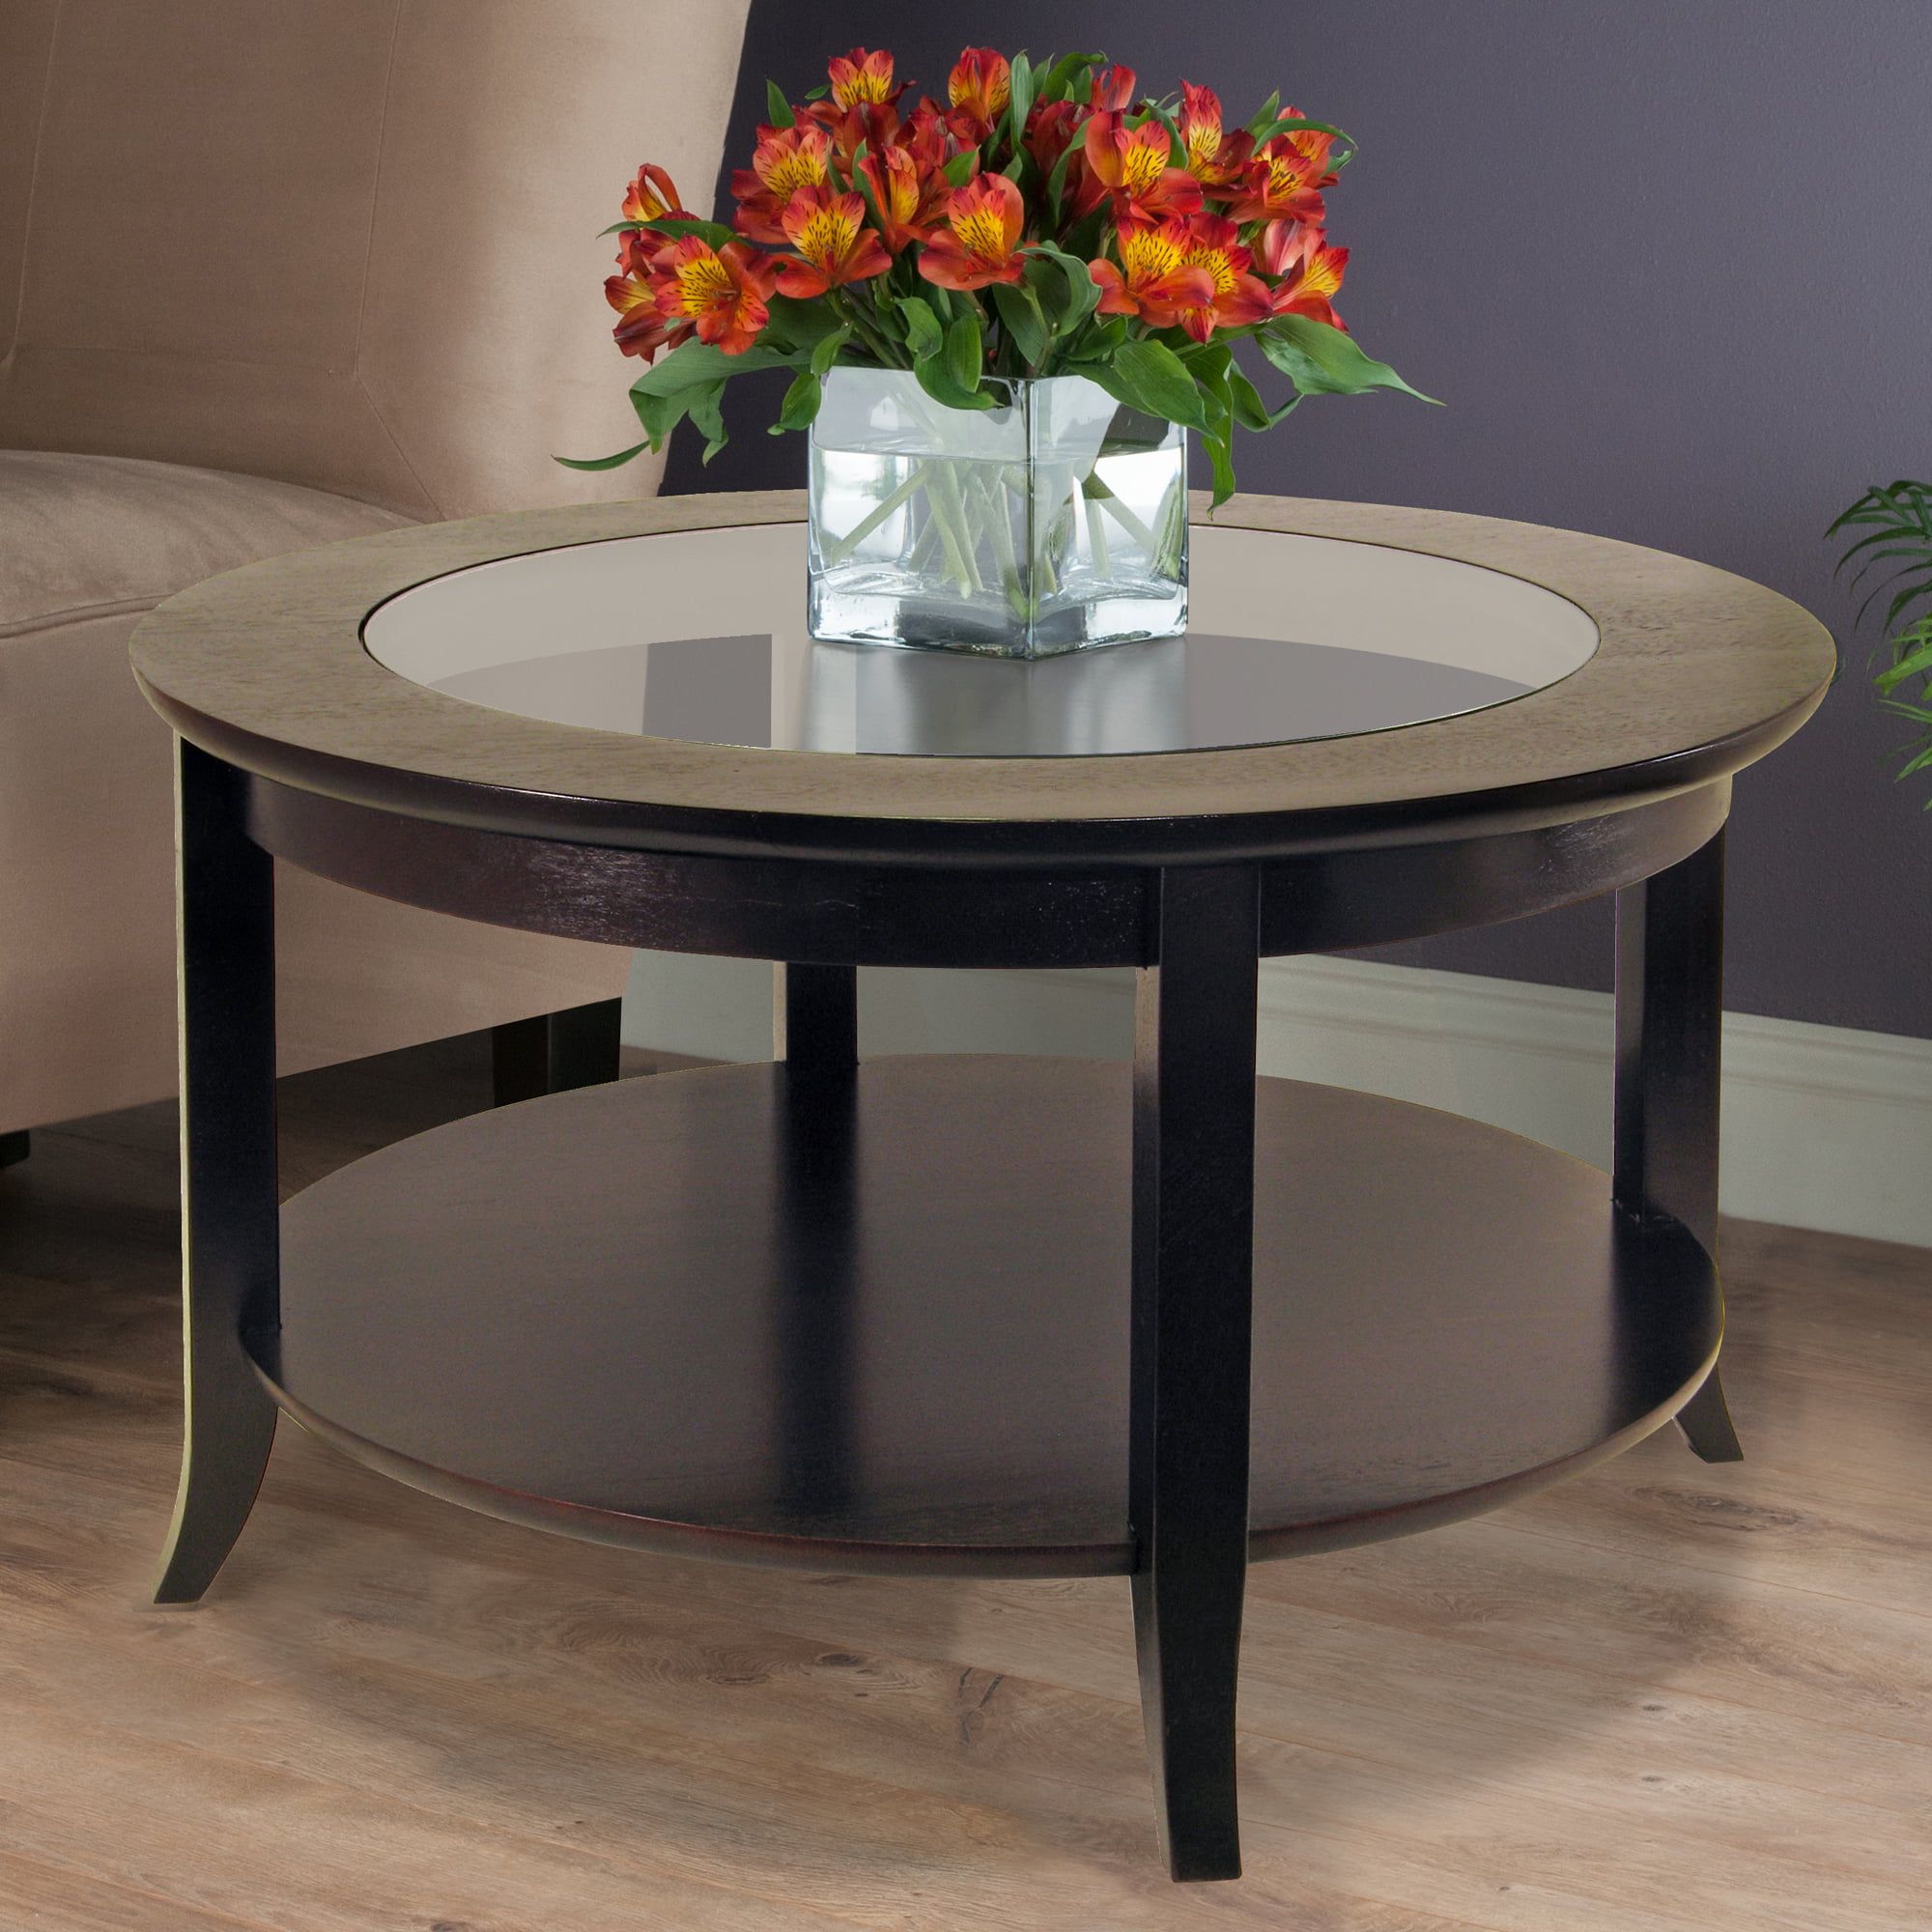 Winsome Wood Genoa Round Coffee Table With Glass Top, Espresso Finish Inside Espresso Wood Finish Coffee Tables (Photo 1 of 15)